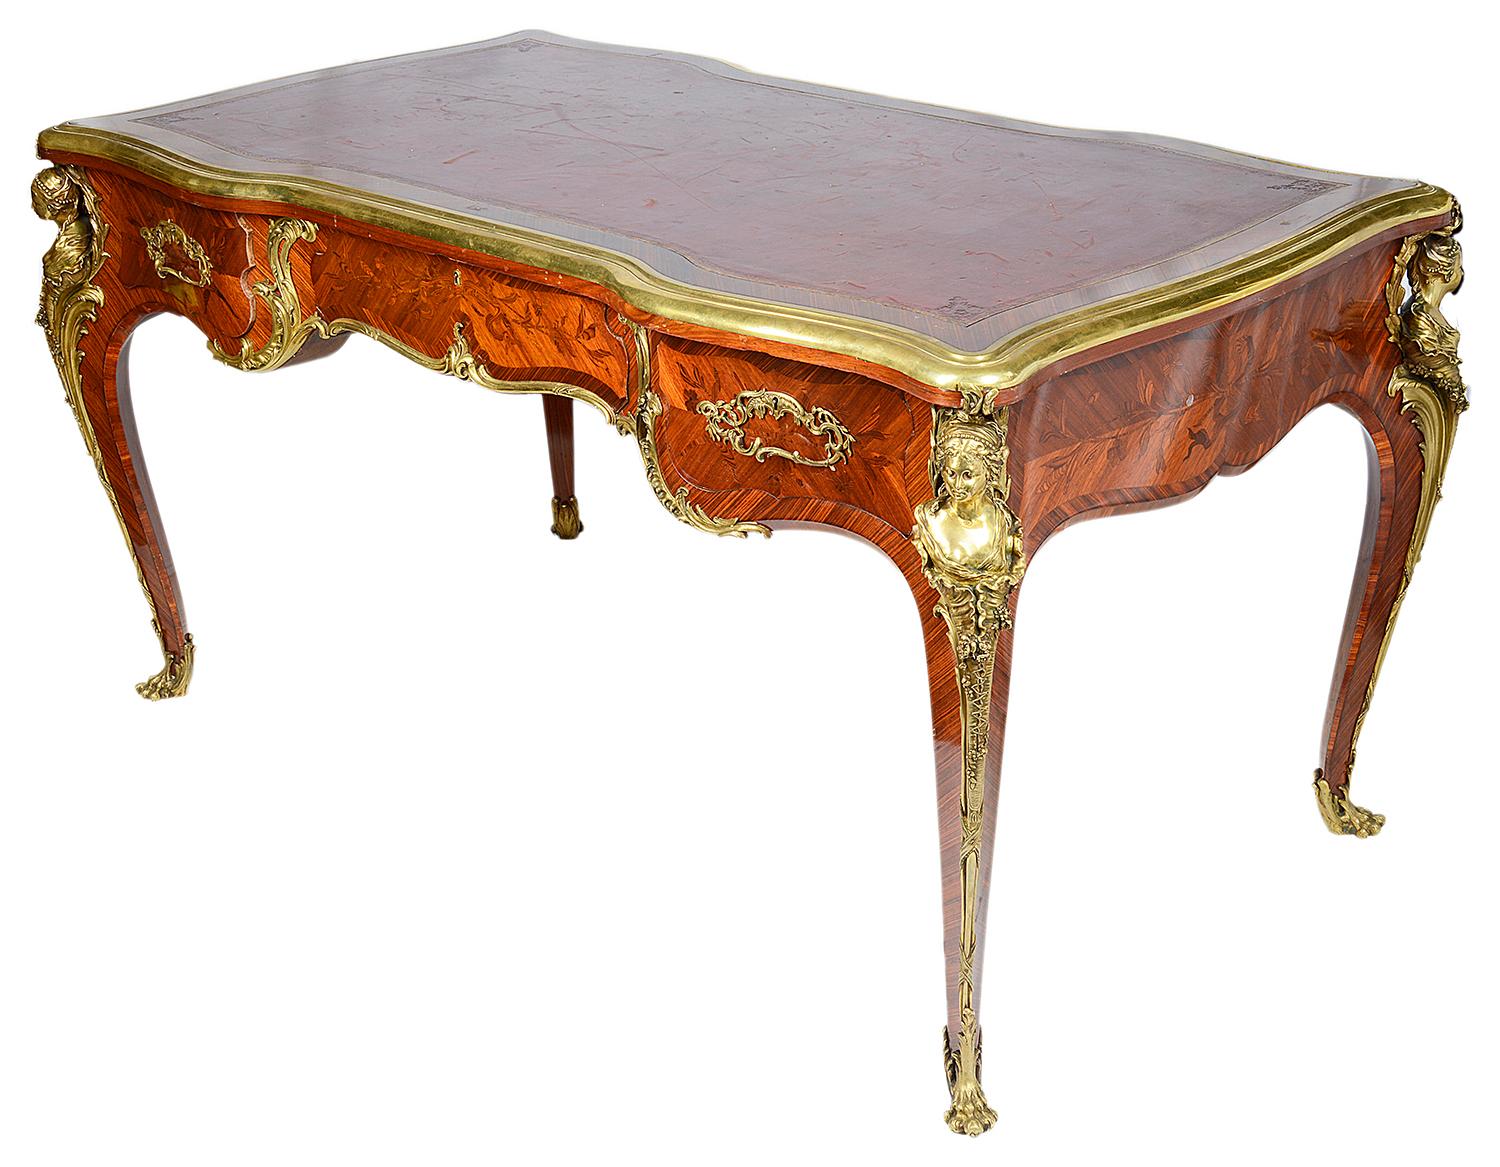 A fine quality 19th century marquetry inlaid French Louis XVI style bureau plat. Having an inset tooled leather top, an ormolu moulding around, three oak lined frieze drawers, with the locks stamped; Schmit, Paris. Dummy drawers to the reverse.
The